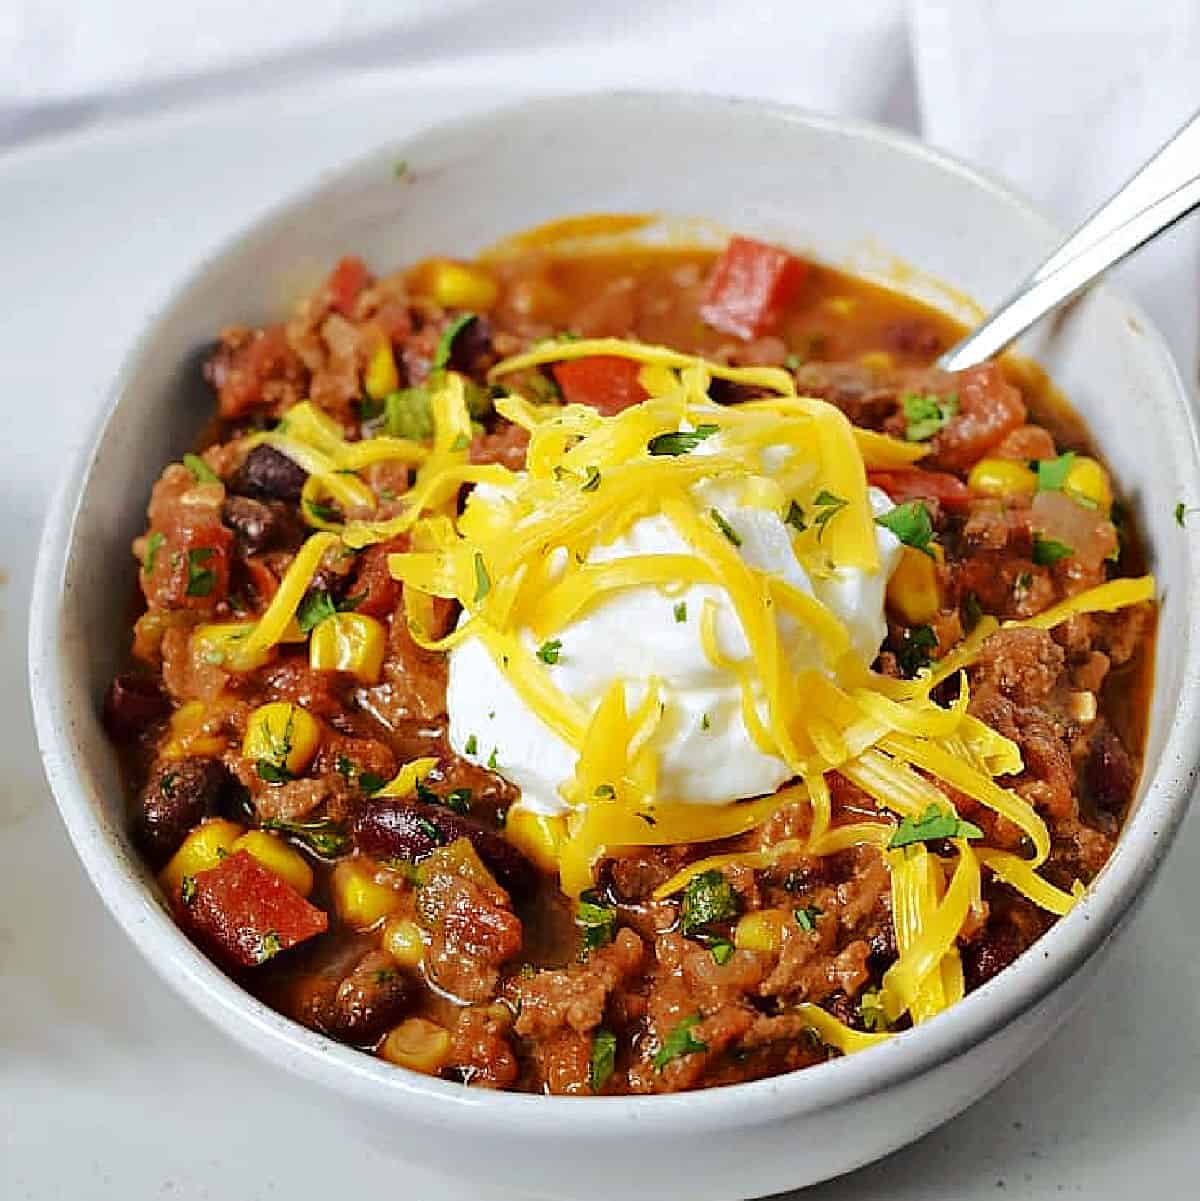 A bowl of chili made with black beans, corn, and tomatoes topped with sour cream and shredded cheddar cheese.